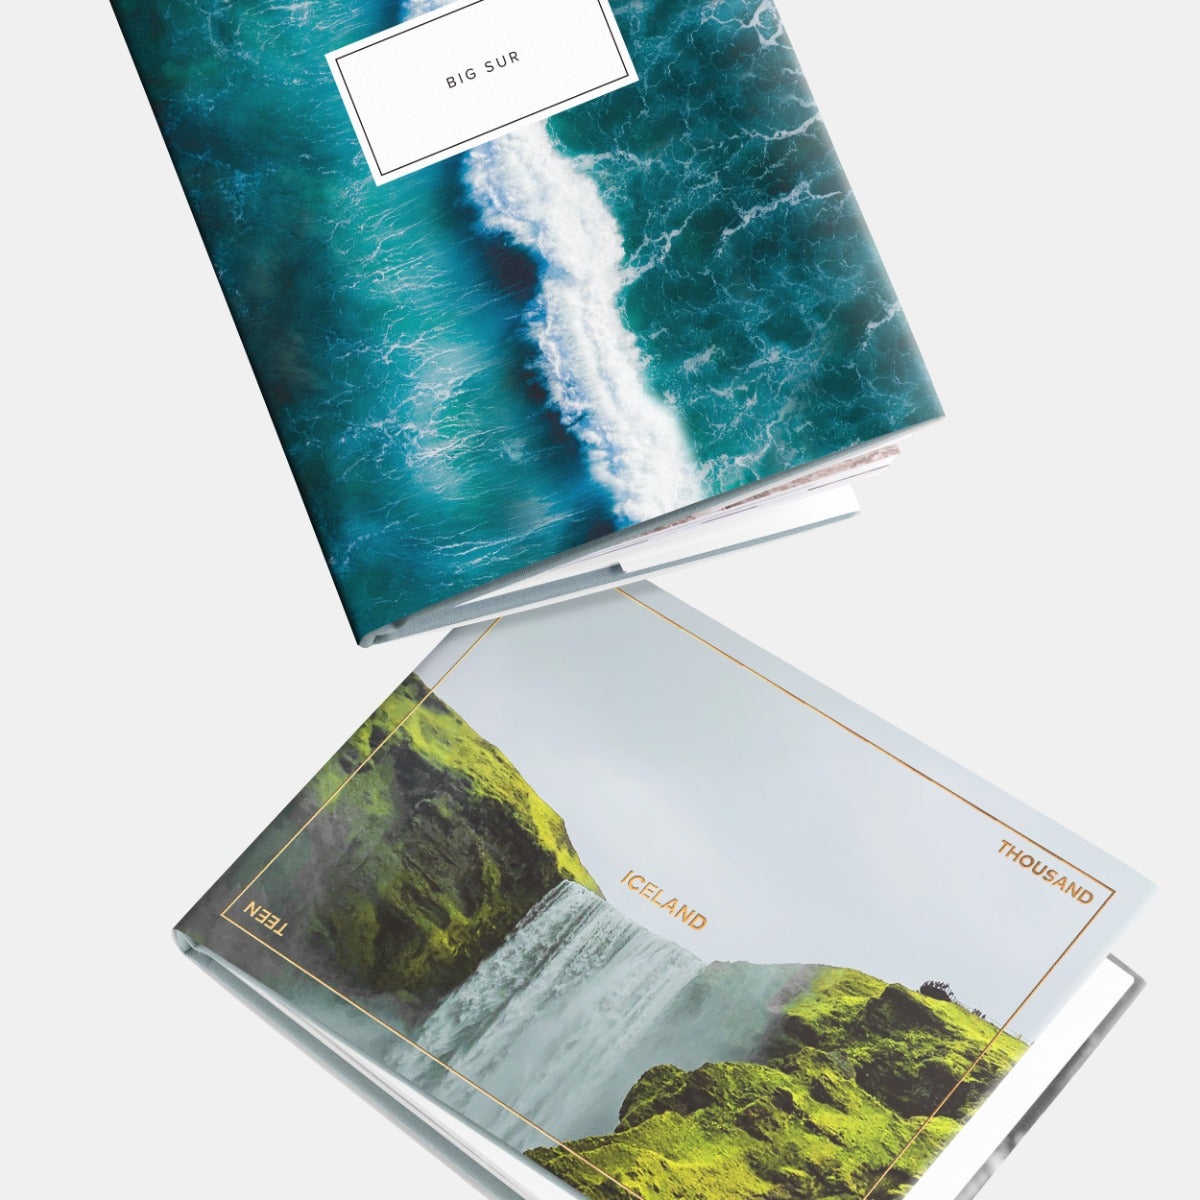 Personalised Travel Memory Book Or Photo Album By jin.b